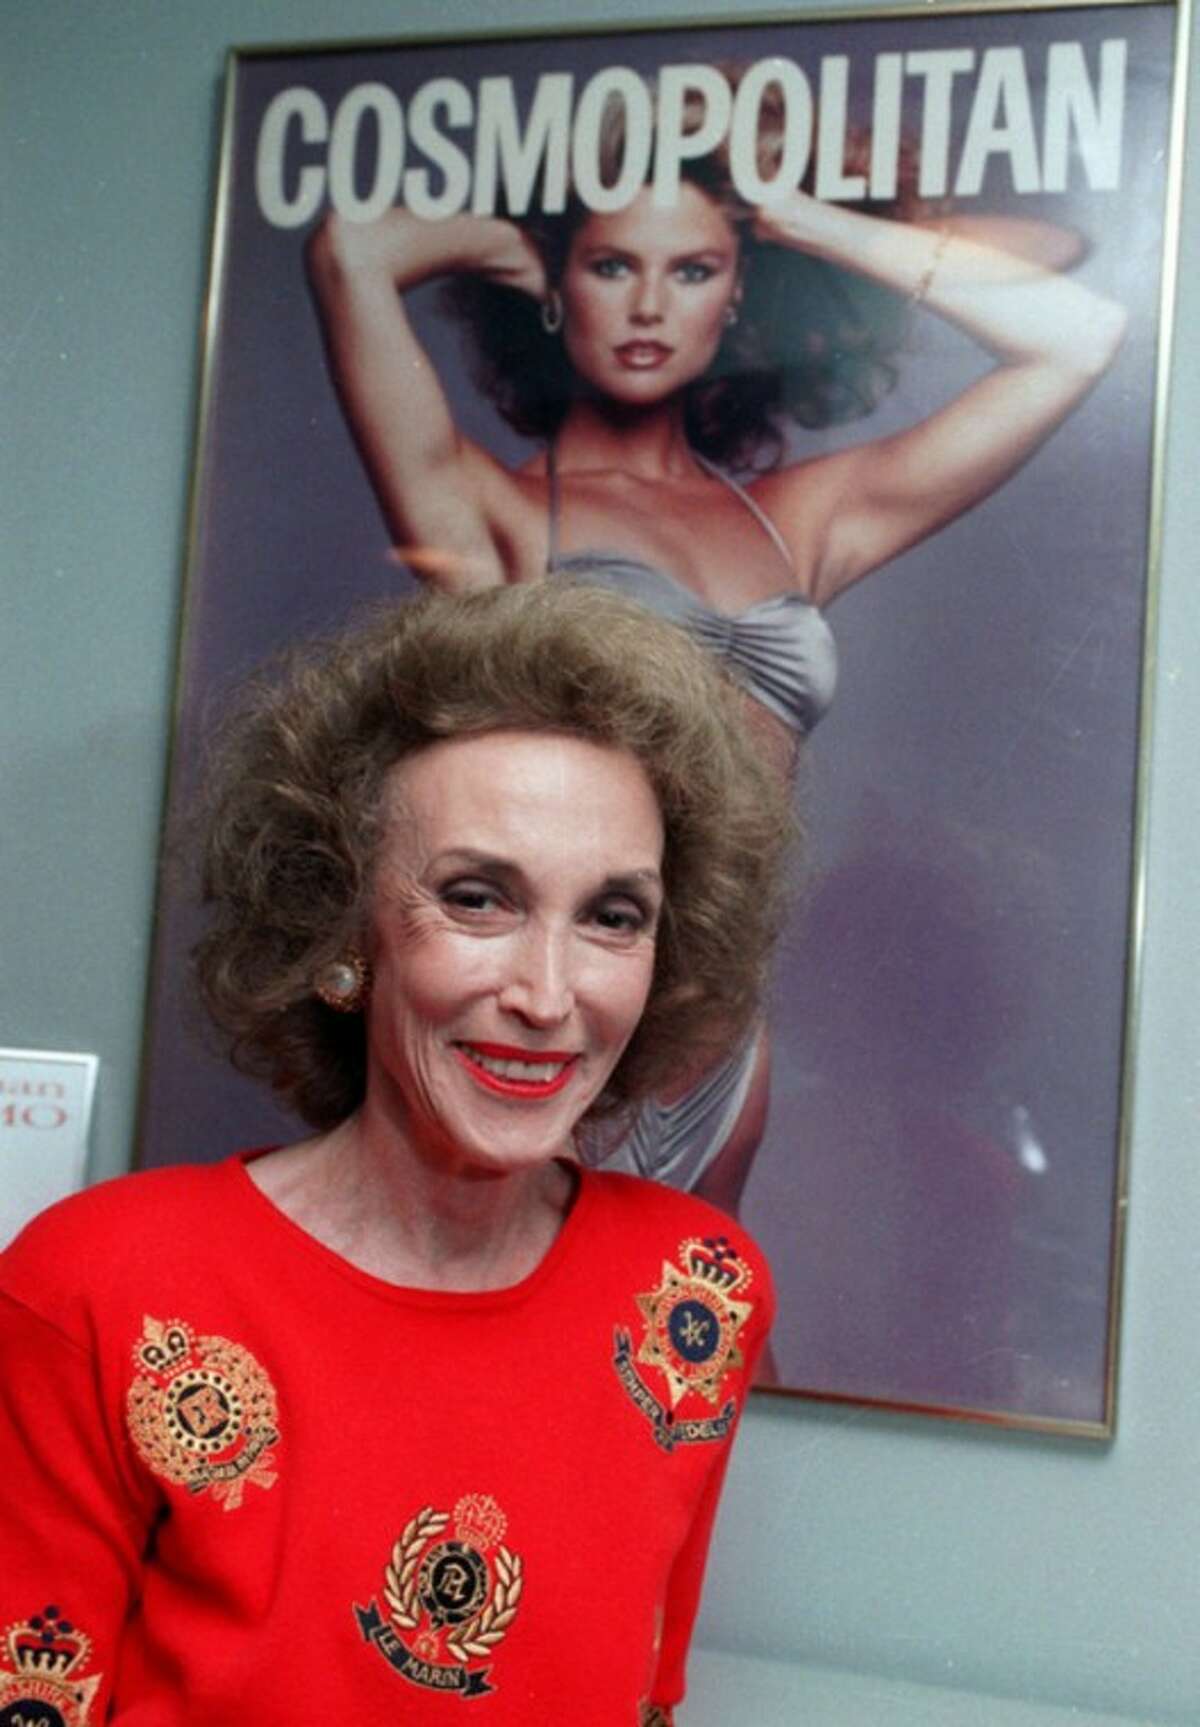 FILE - This 1990 file photo shows Cosmopolitan magazine editor Helen Gurley Brown in her New York office. Brown, longtime editor of Cosmopolitan magazine, died Monday, Aug. 13, 2012 at a hospital in New York after a brief hospitalization. She was 90. (AP Photo/Marty Lederhandler, File)